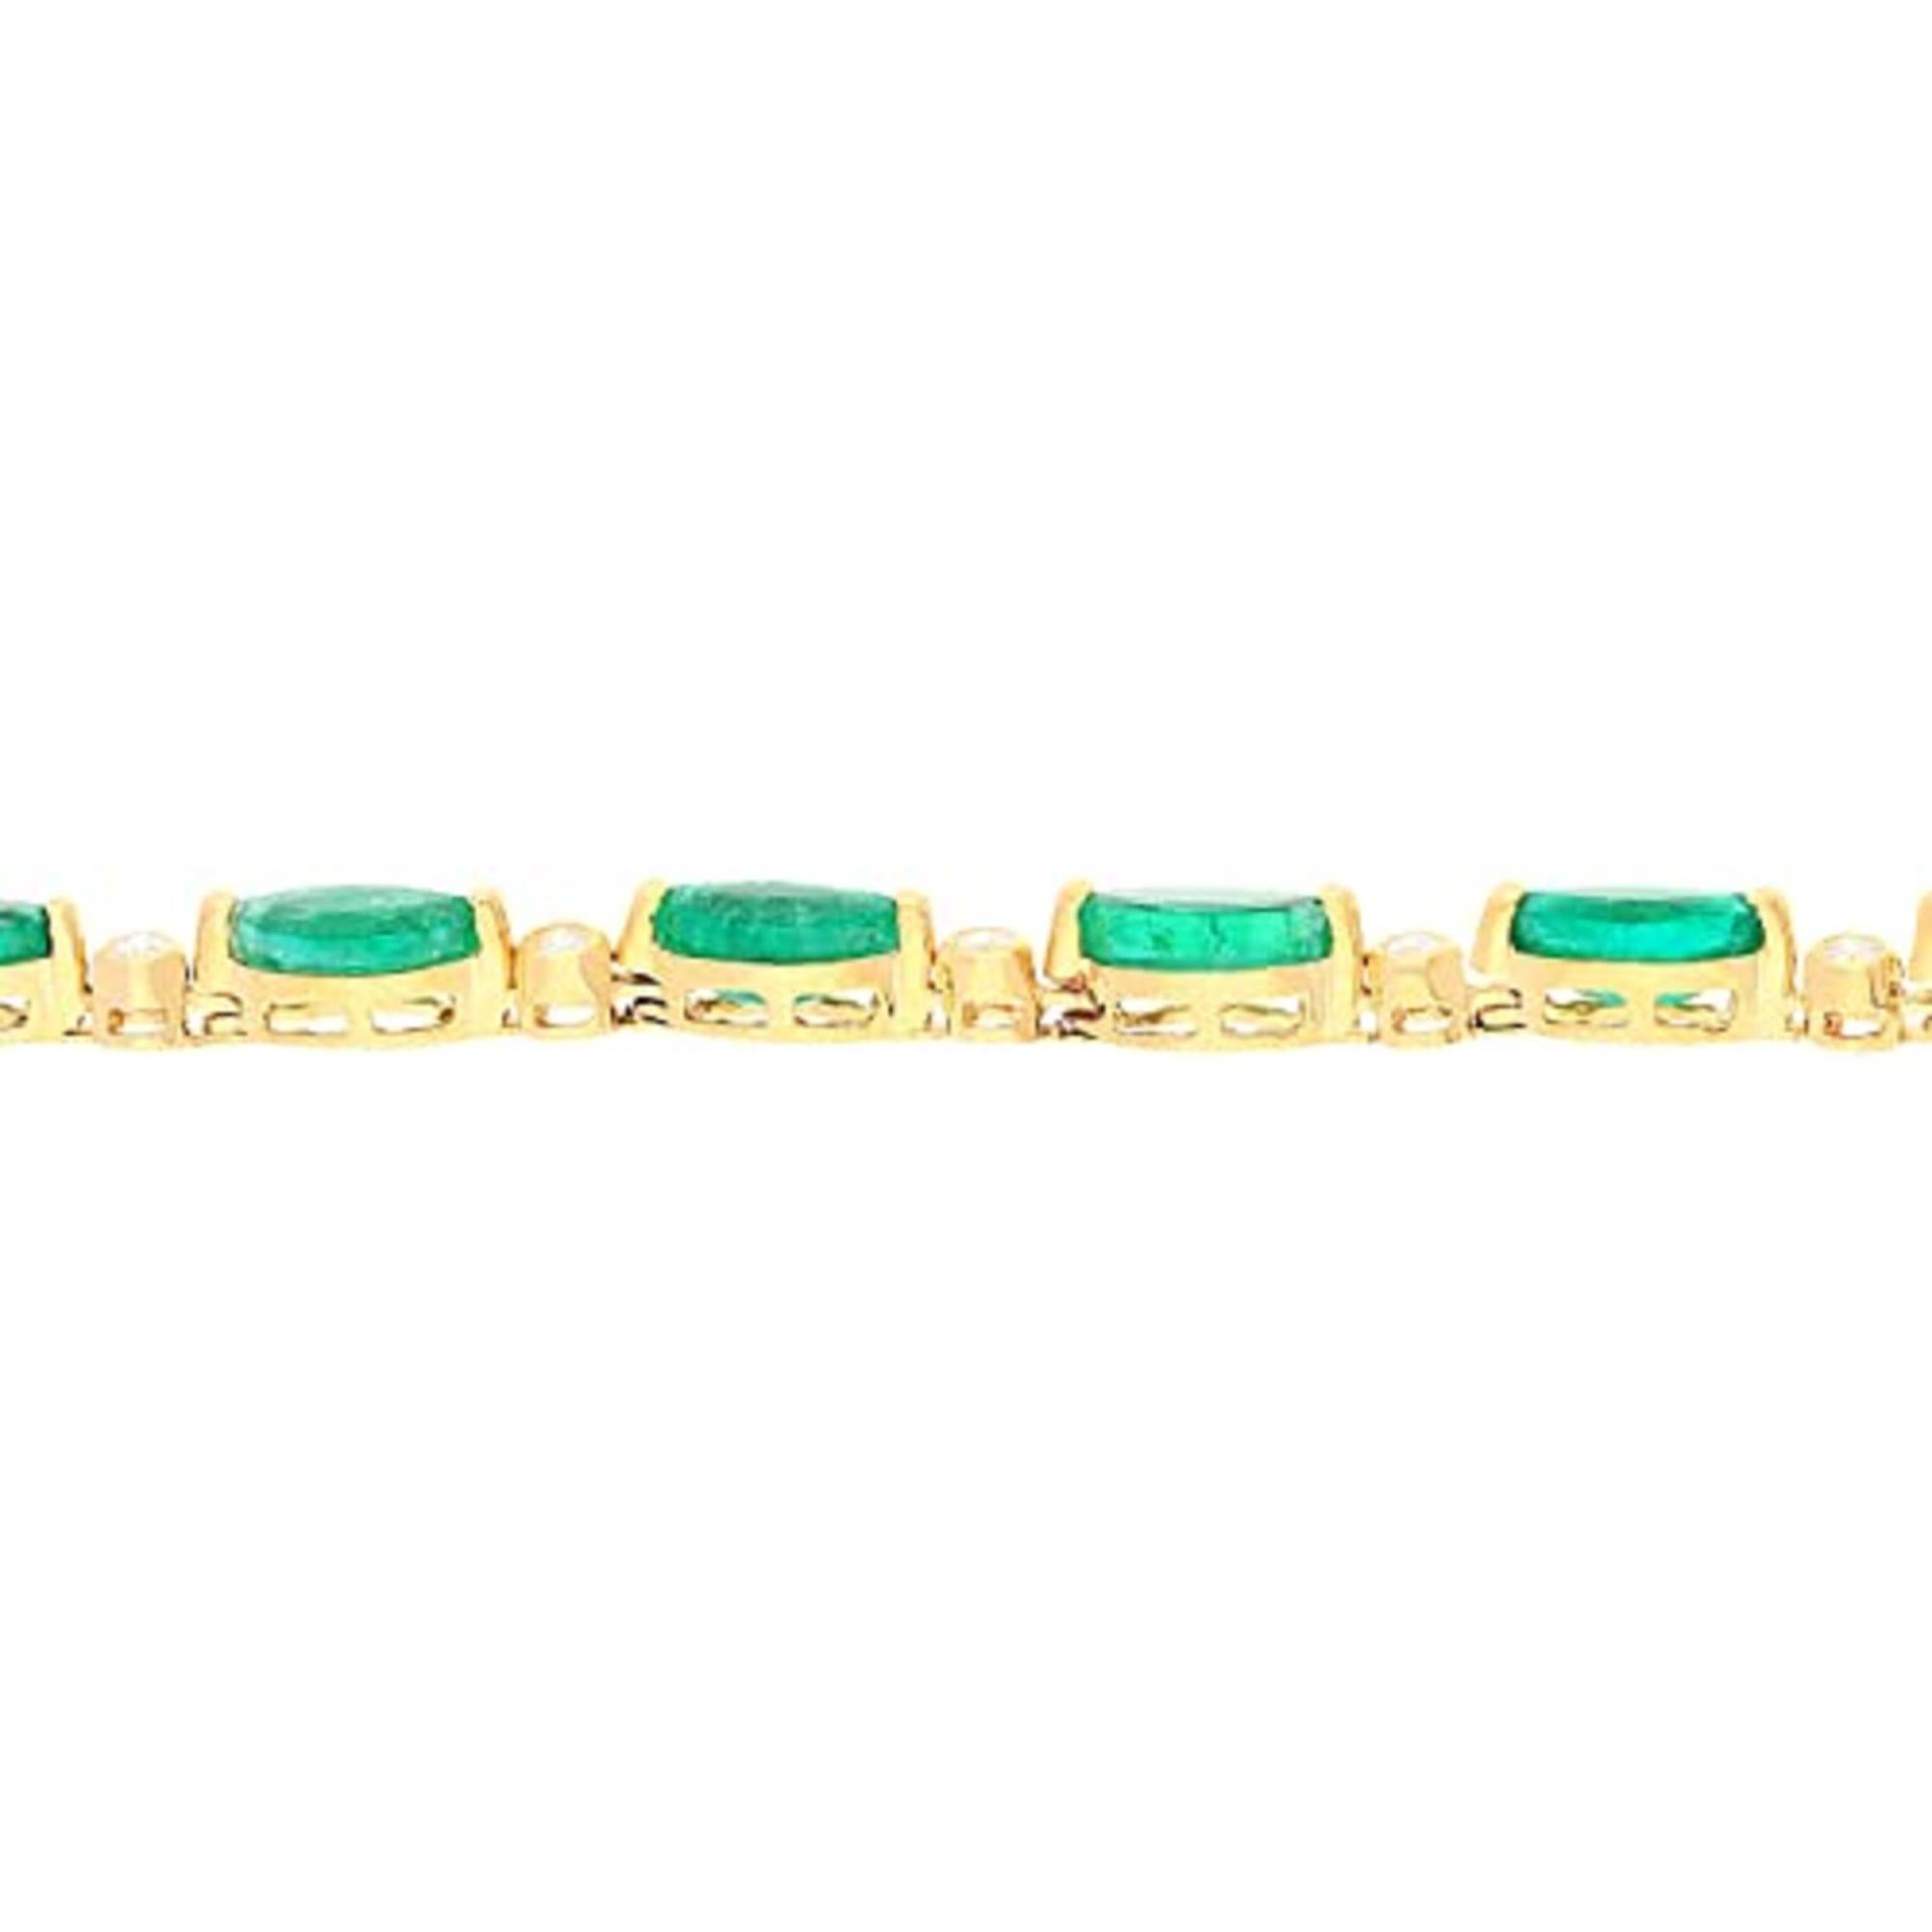 Decorate yourself in elegance with this Bracelet is crafted from 18-karat Yellow Gold by Gin & Grace. This Bracelet is made up of 7x3.5 mm Marquise-cut Emerald (16 pcs) 4.98 carat and Round-cut White Diamond (16 Pcs) 0.25 Carat. This Bracelet is